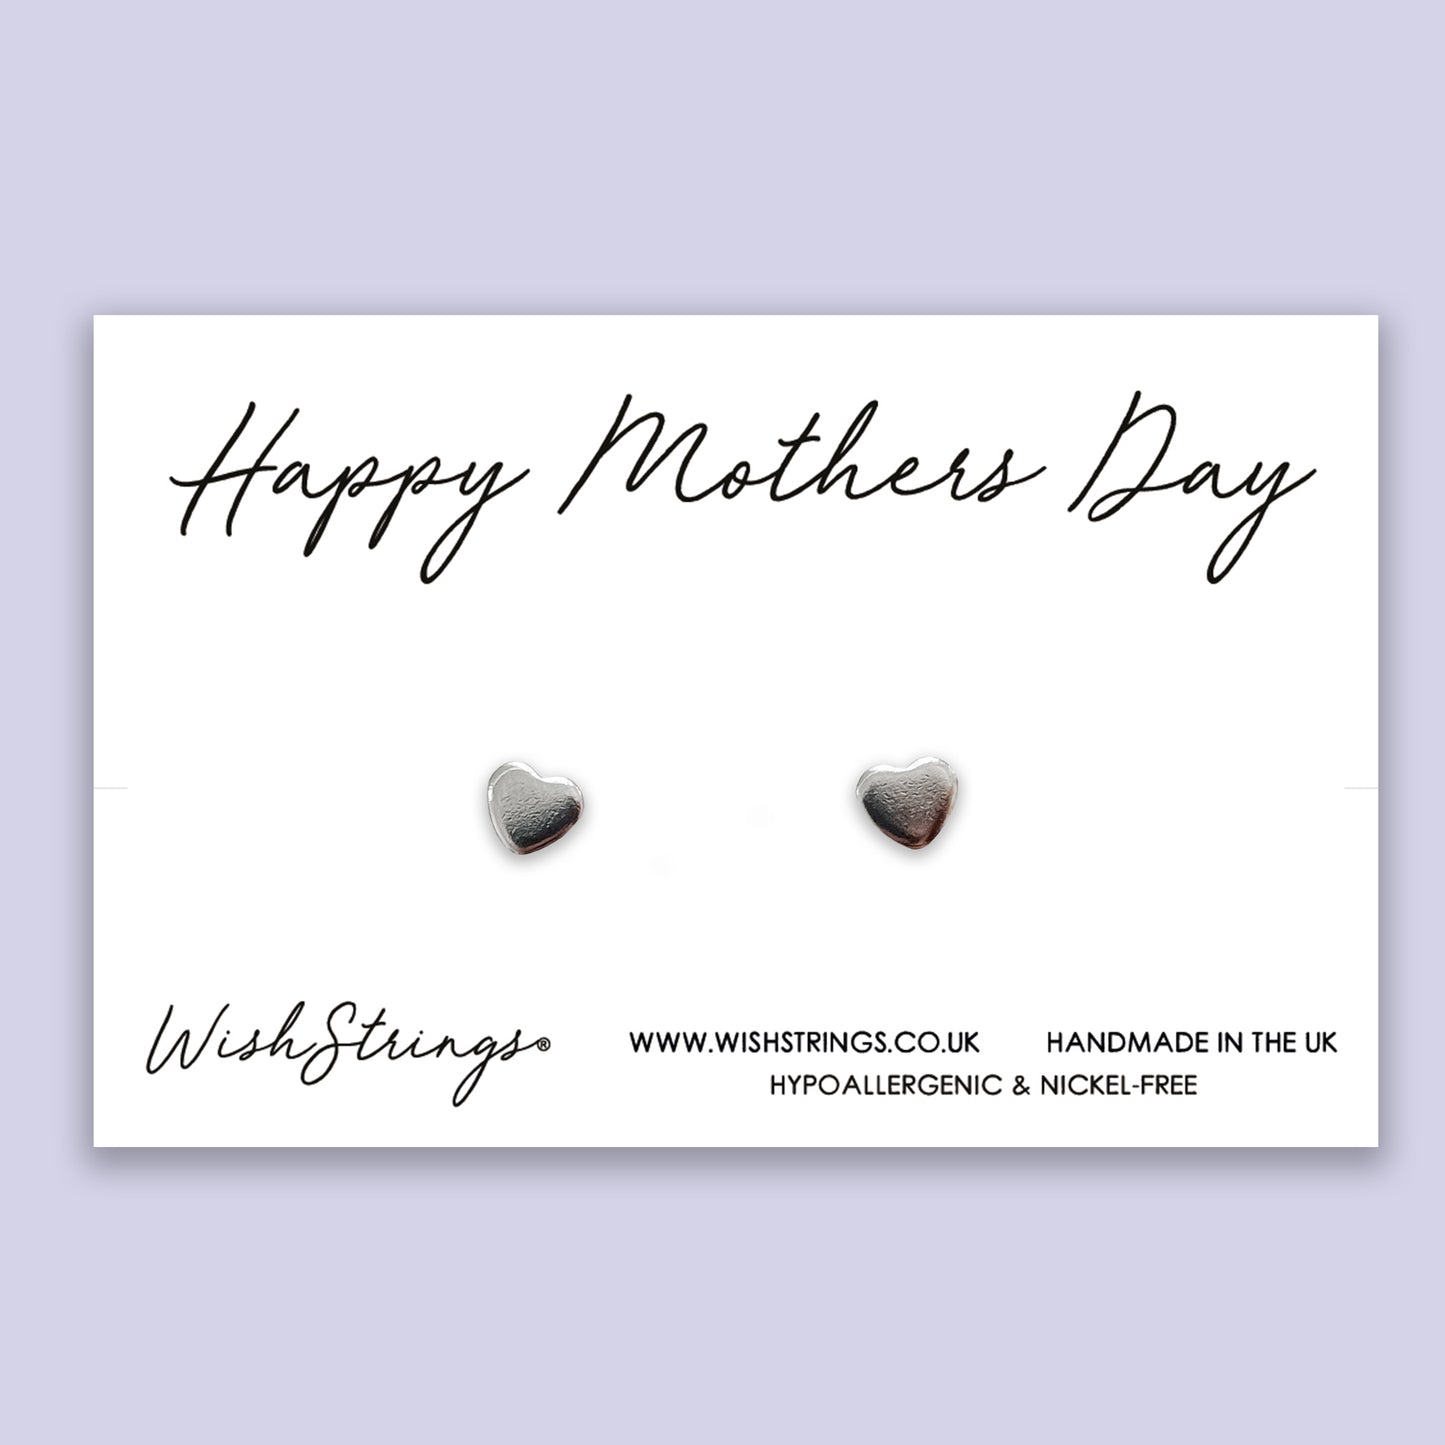 Happy Mothers Day - Silver Heart Stud Earrings | 304 Stainless - Hypoallergenic